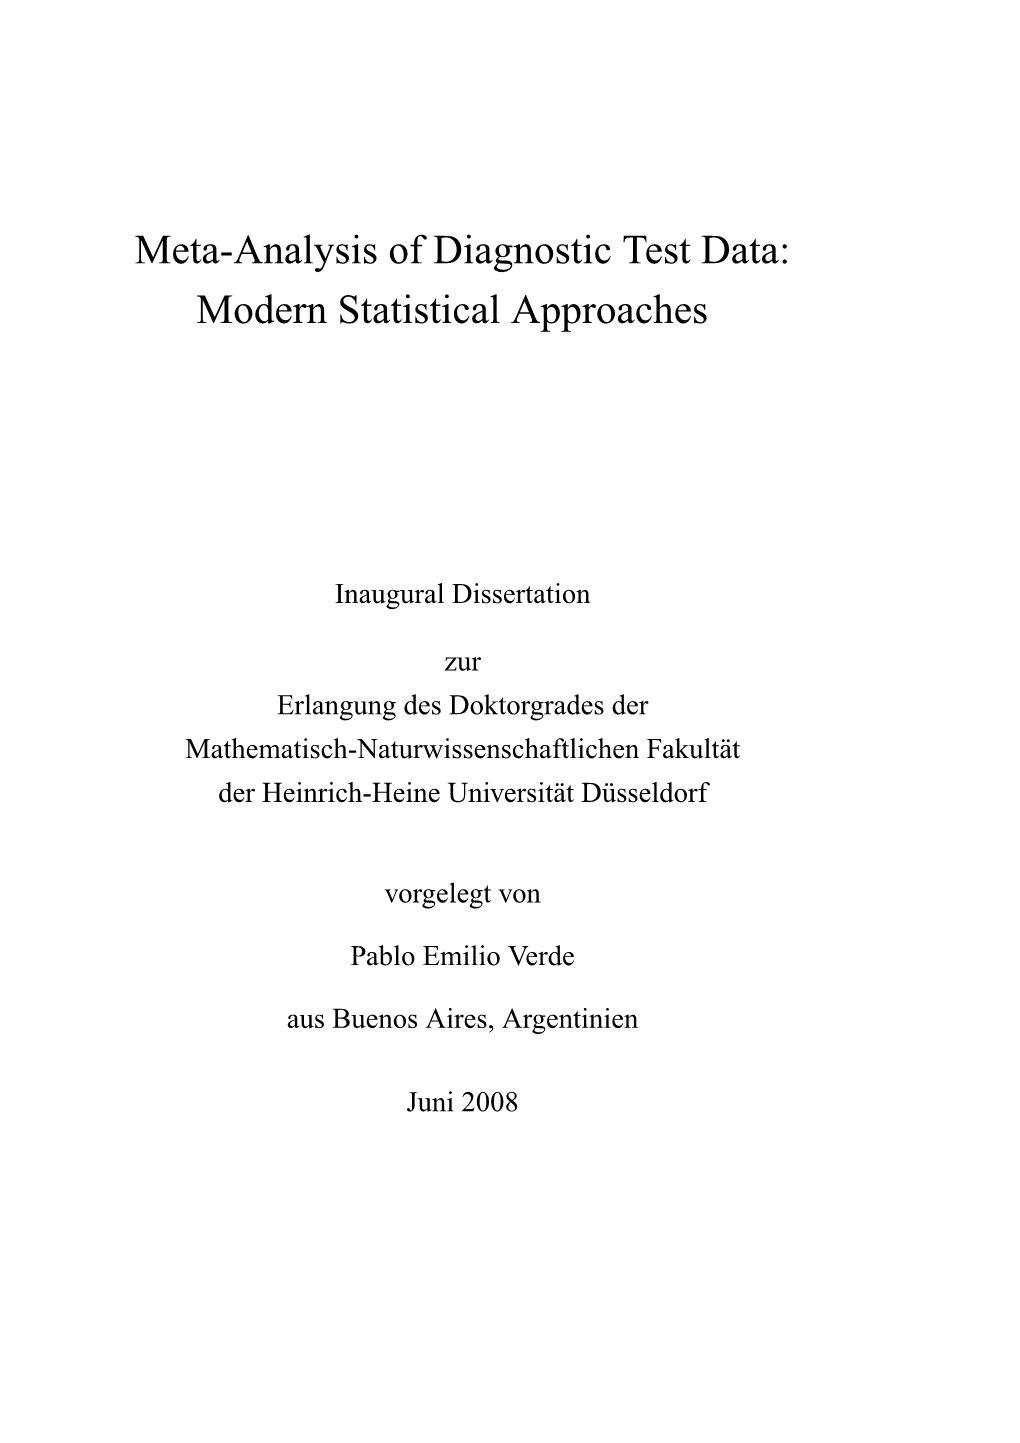 Meta-Analysis of Diagnostic Test Data: Modern Statistical Approaches